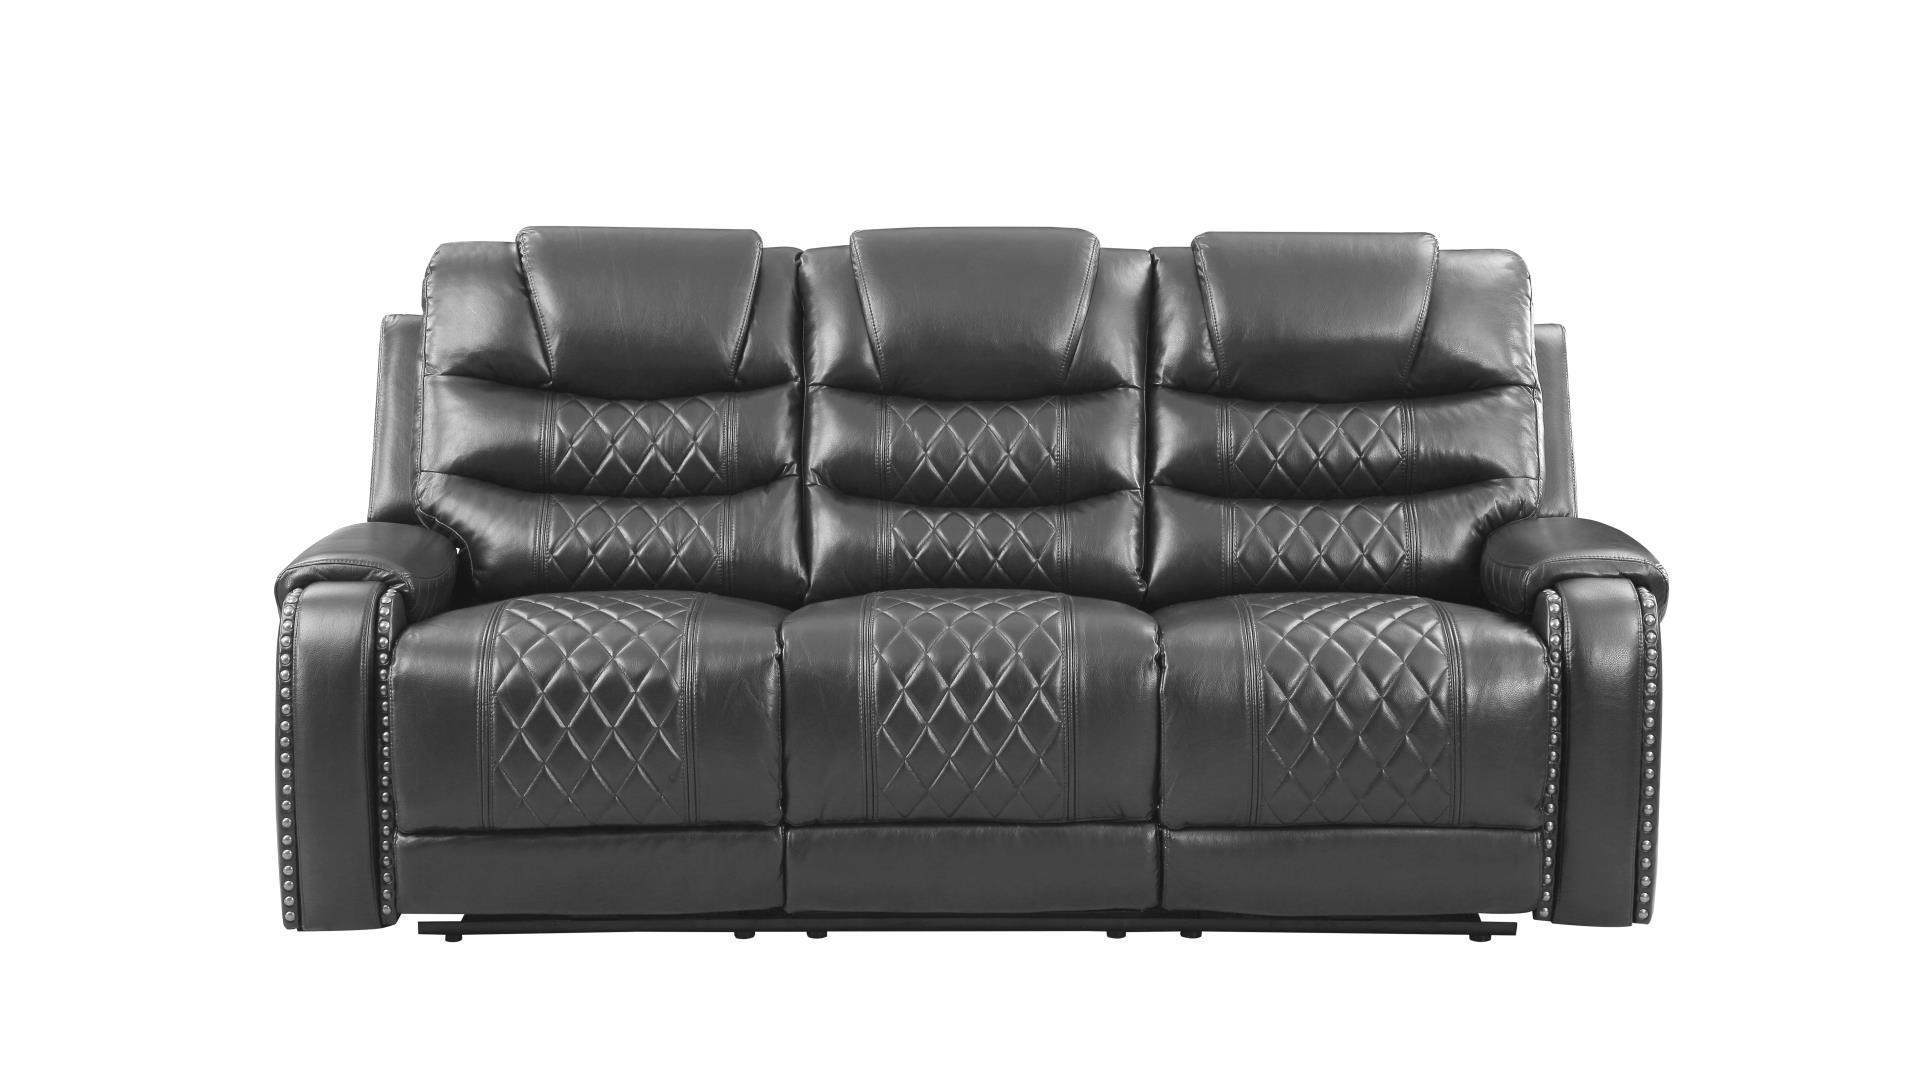 Contemporary, Modern Recliner Sofa TENNESSEE-GR TENNESSEE-GR-S in Gray Eco Leather